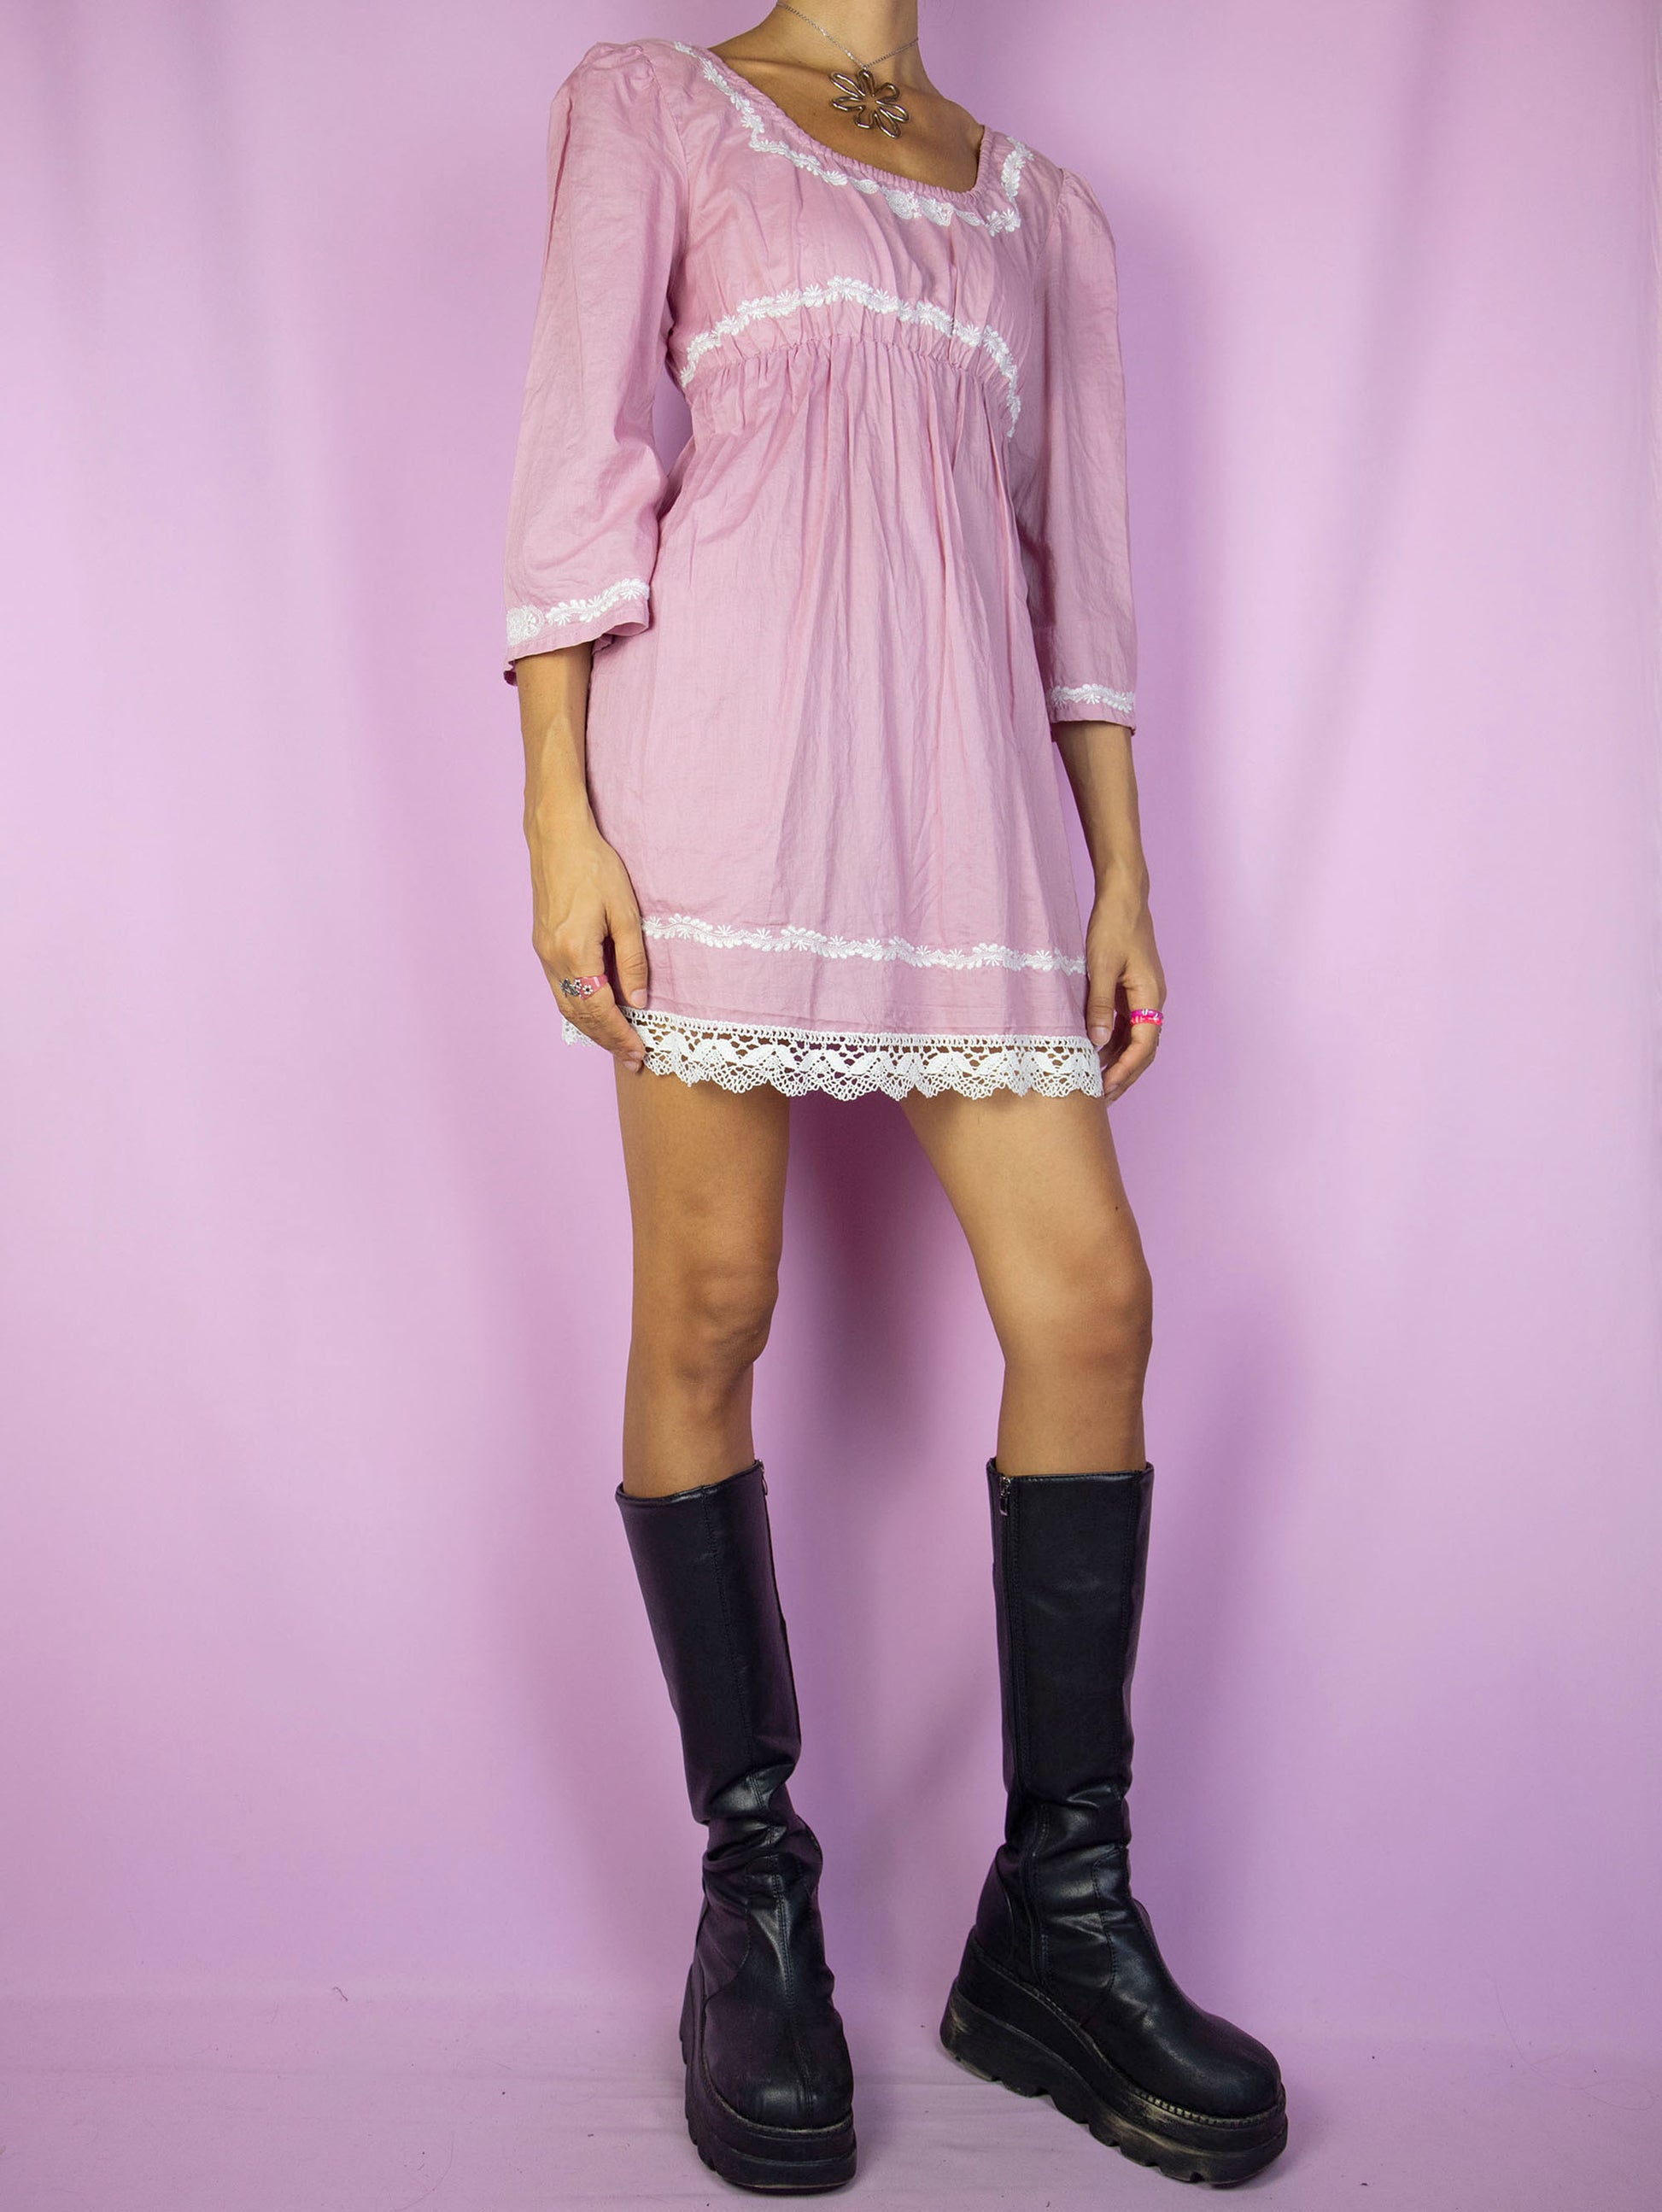 The Y2K Pink Cottage Mini Dress is a vintage dusty pink half-sleeve dress with white embroidered floral details, tied at the back. Romantic country prairie 2000s boho summer dress.